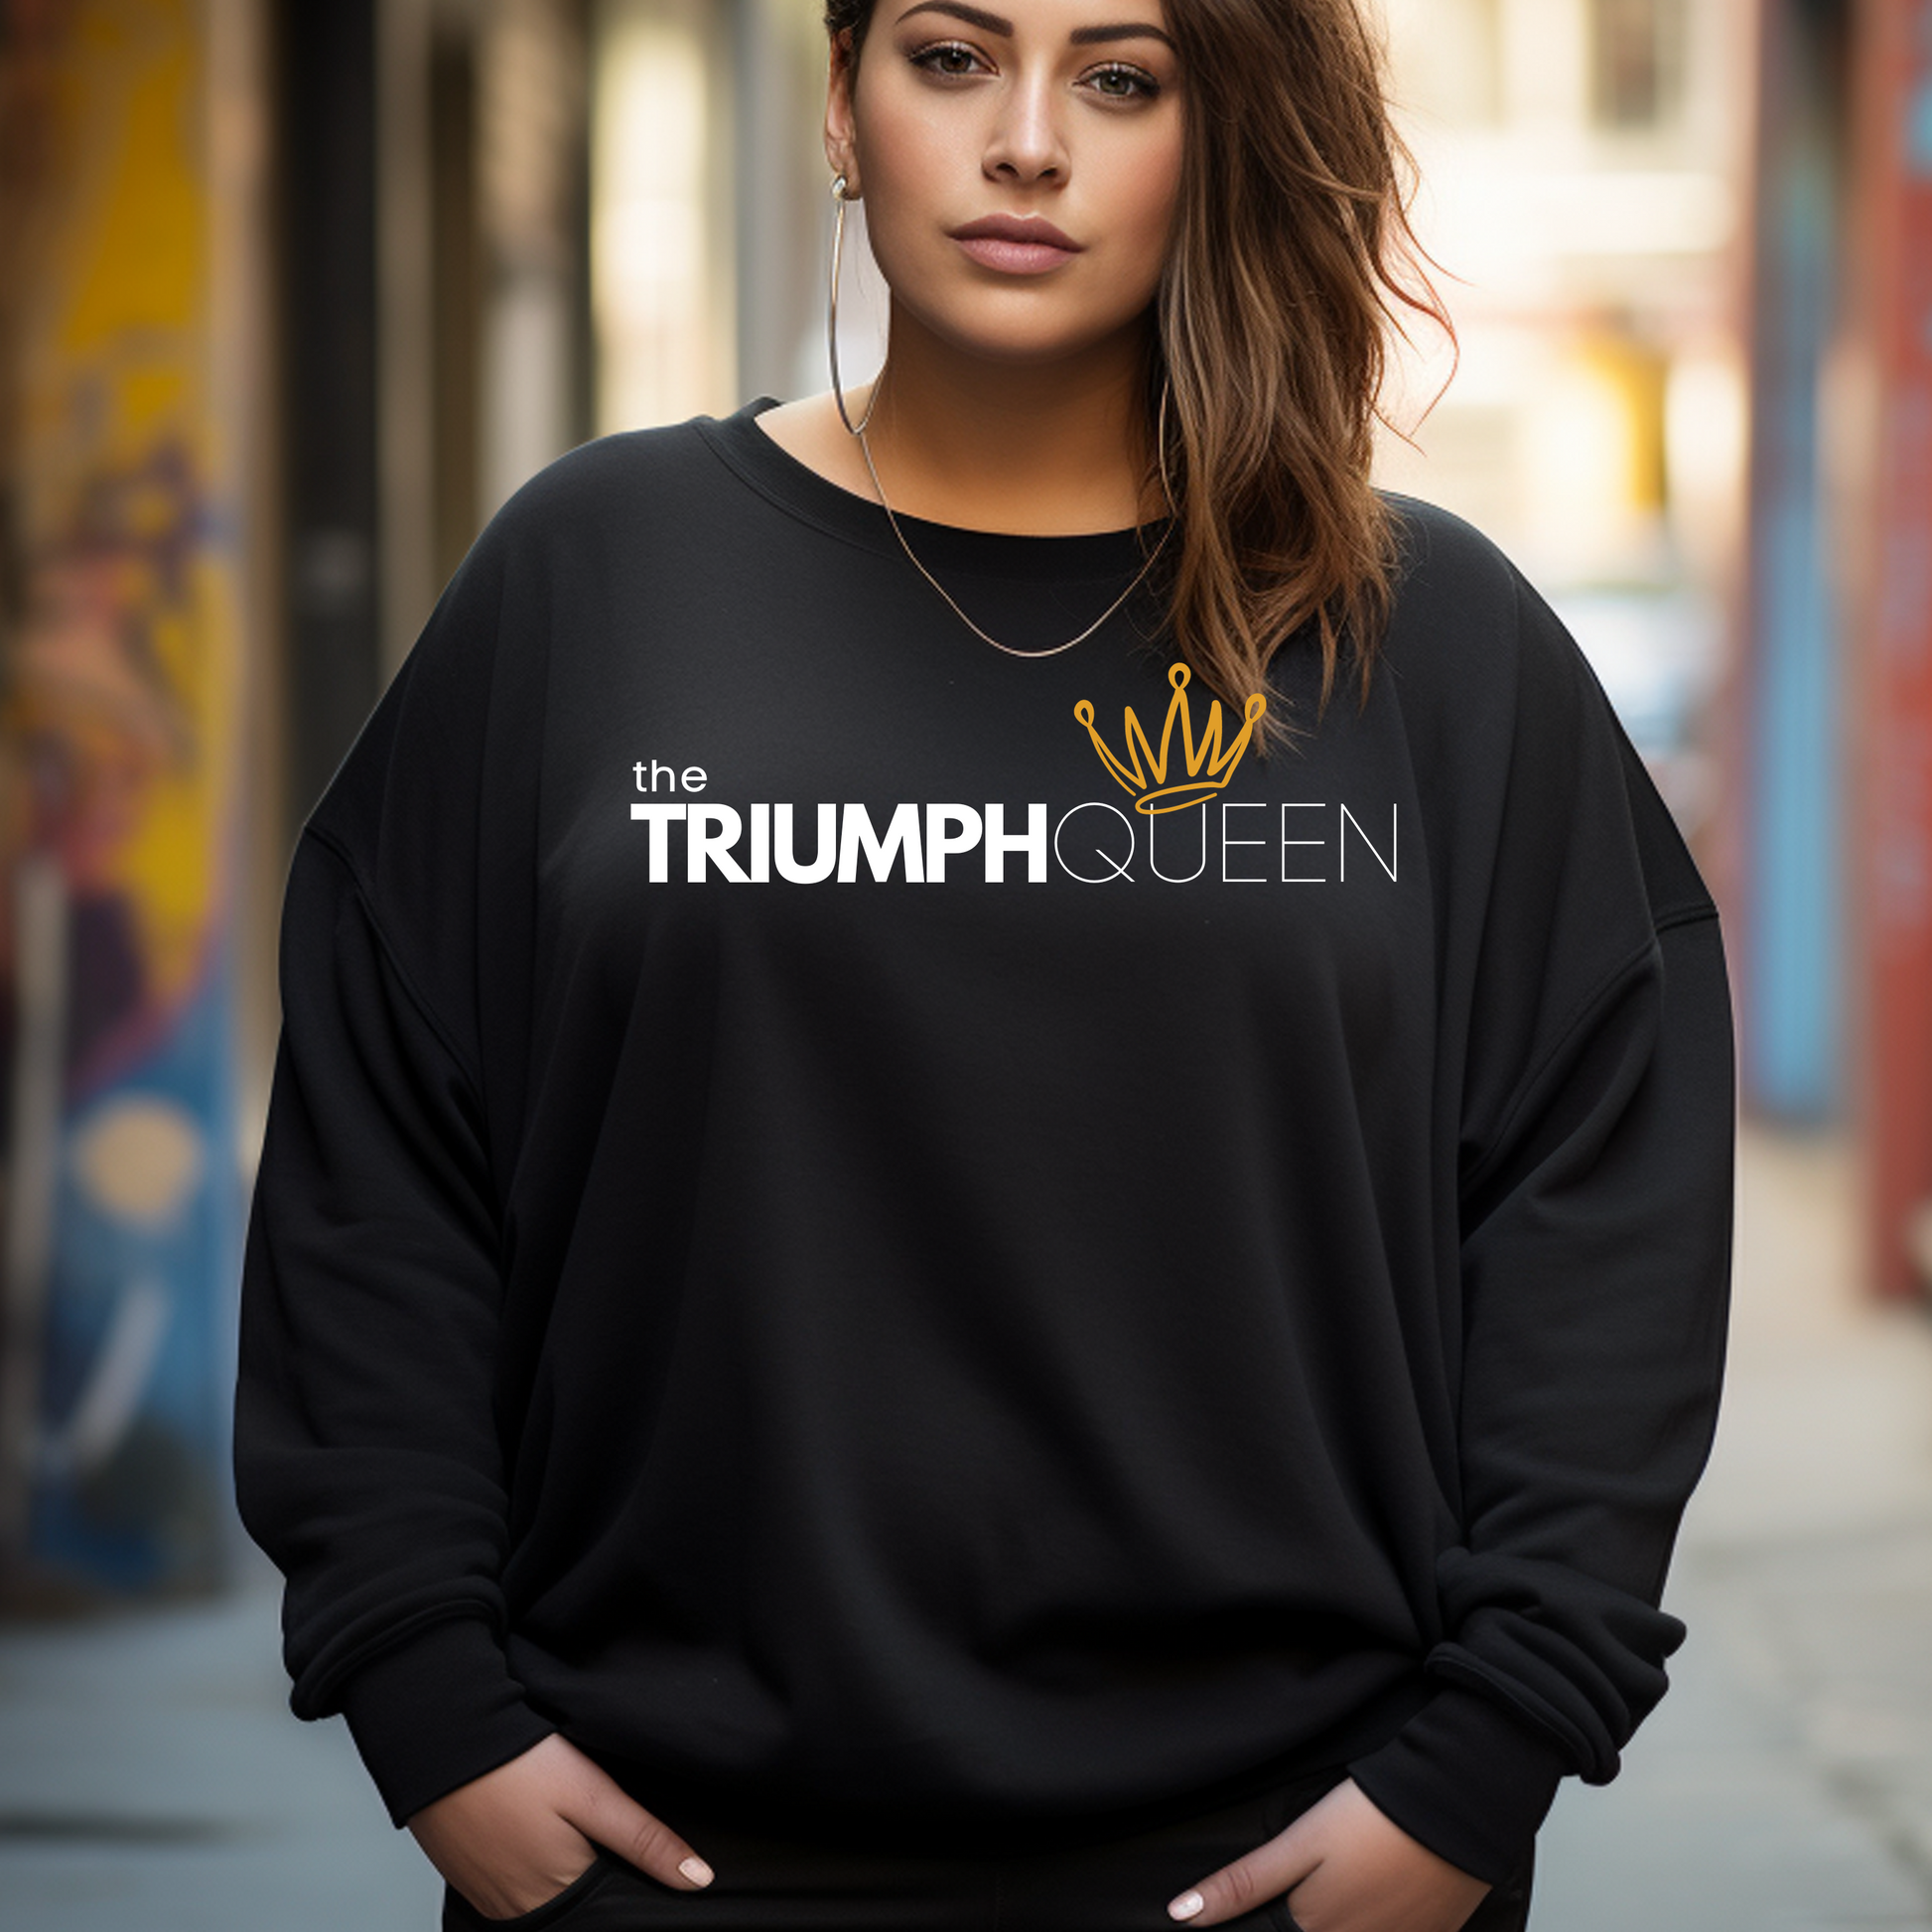 Shop our Triumph Queen black sweatshirt. This cozy faith based clothing is for Saved women who know they're more than conquerors. This shirt is soft and comfy enough for everyday wear.